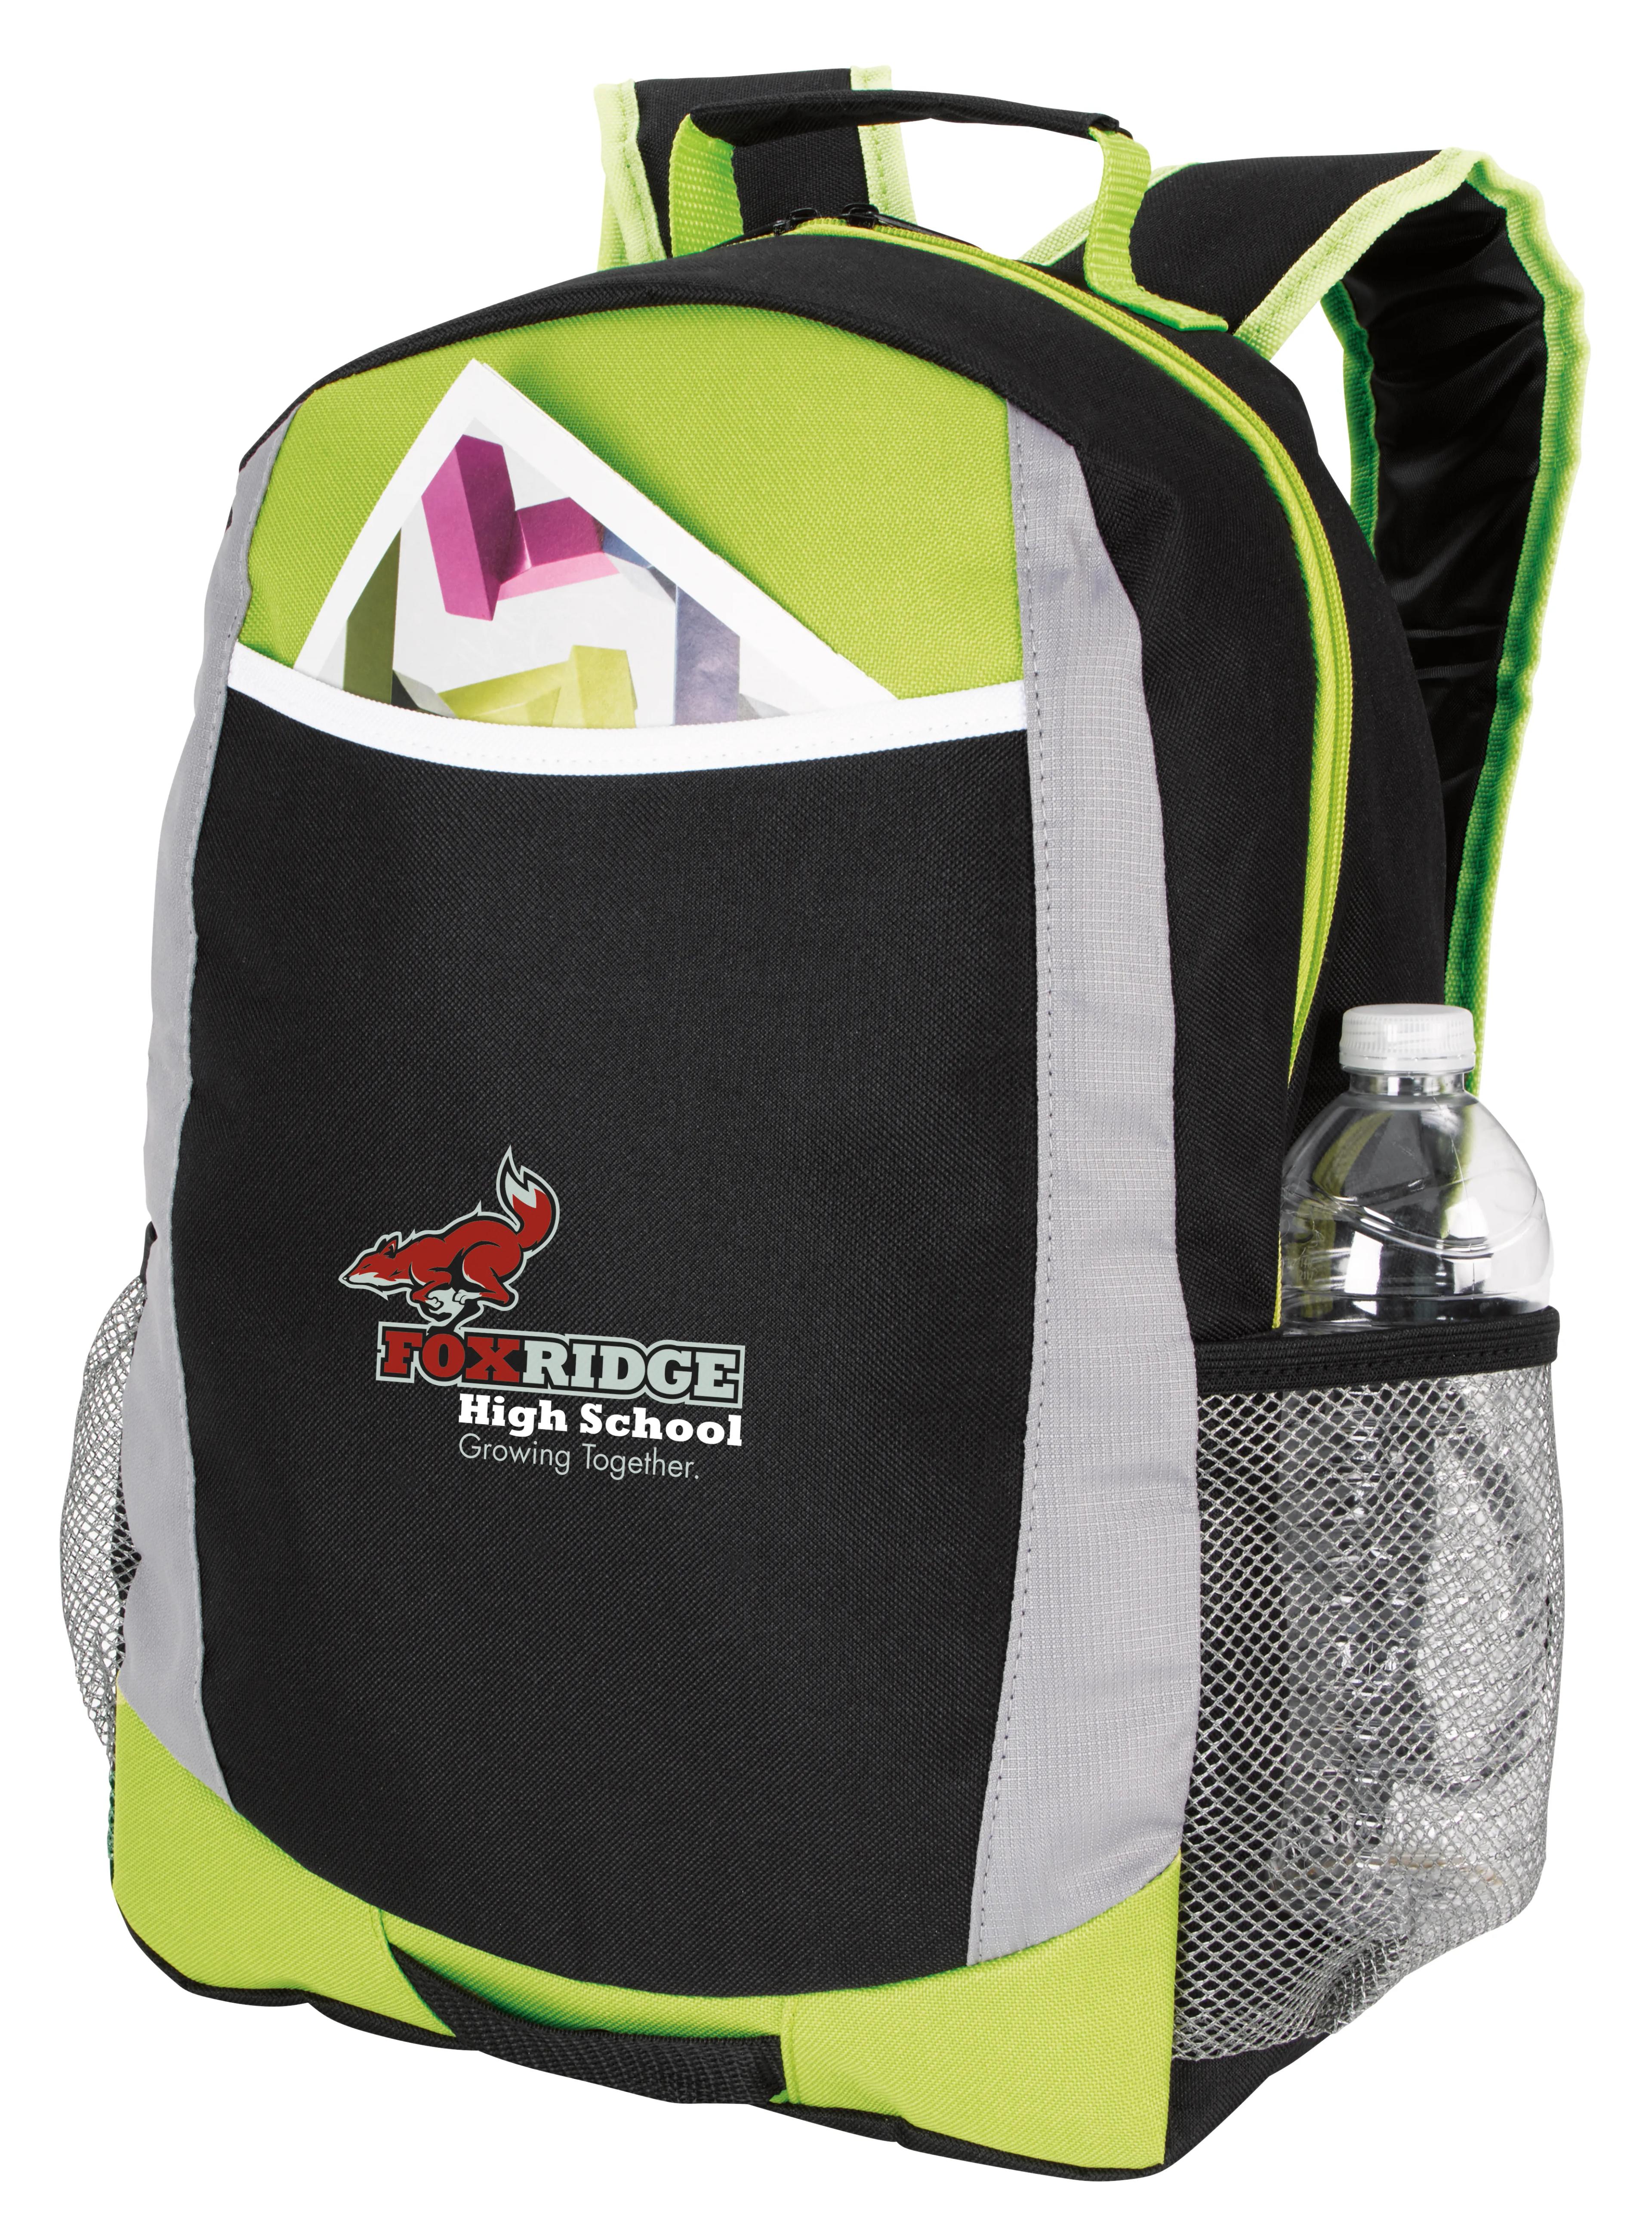 Primary Sport Backpack 11 of 14